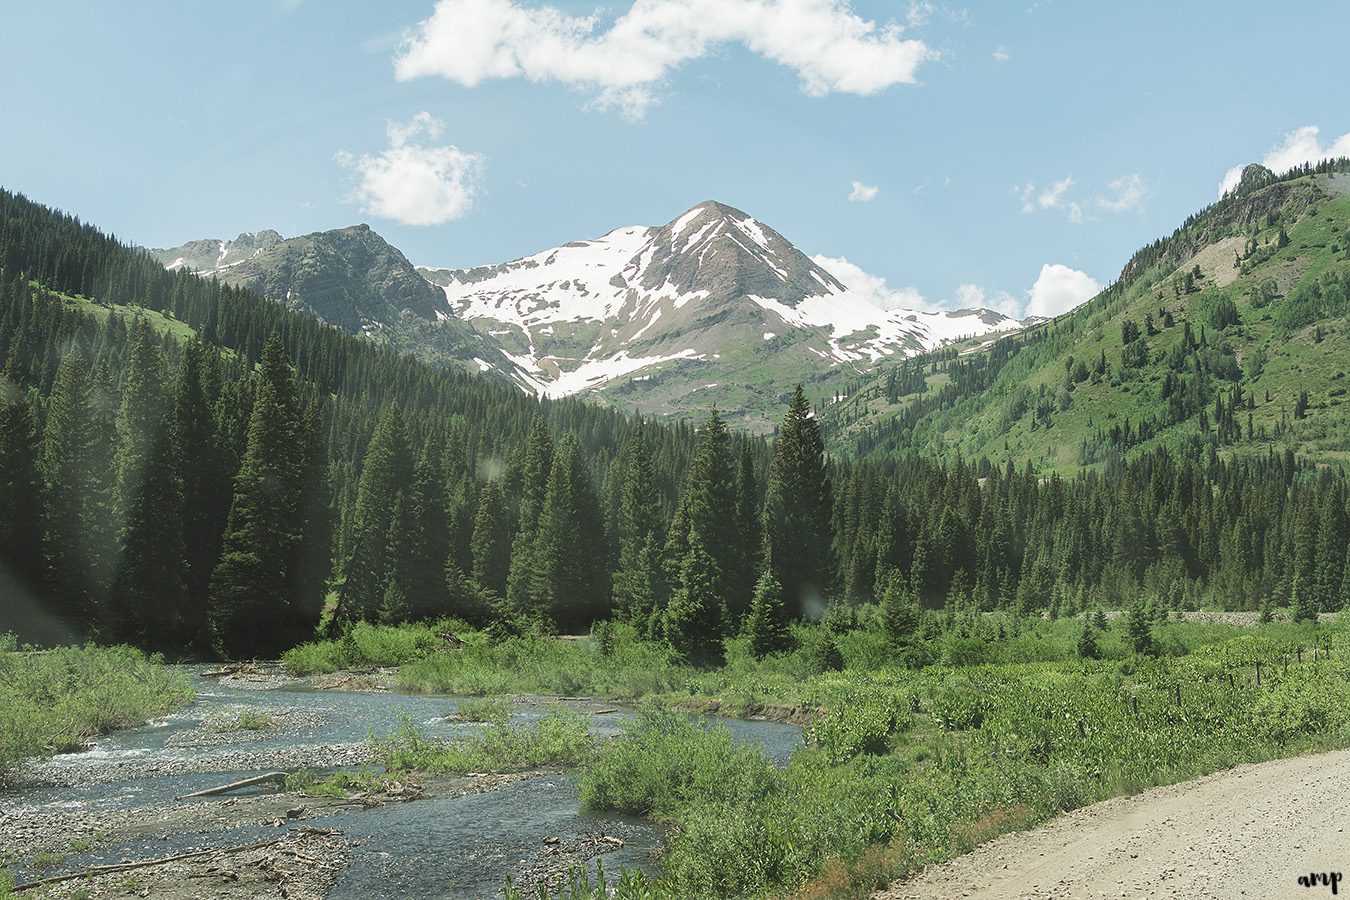 Camping in Crested Butte | amanda.matilda.photography